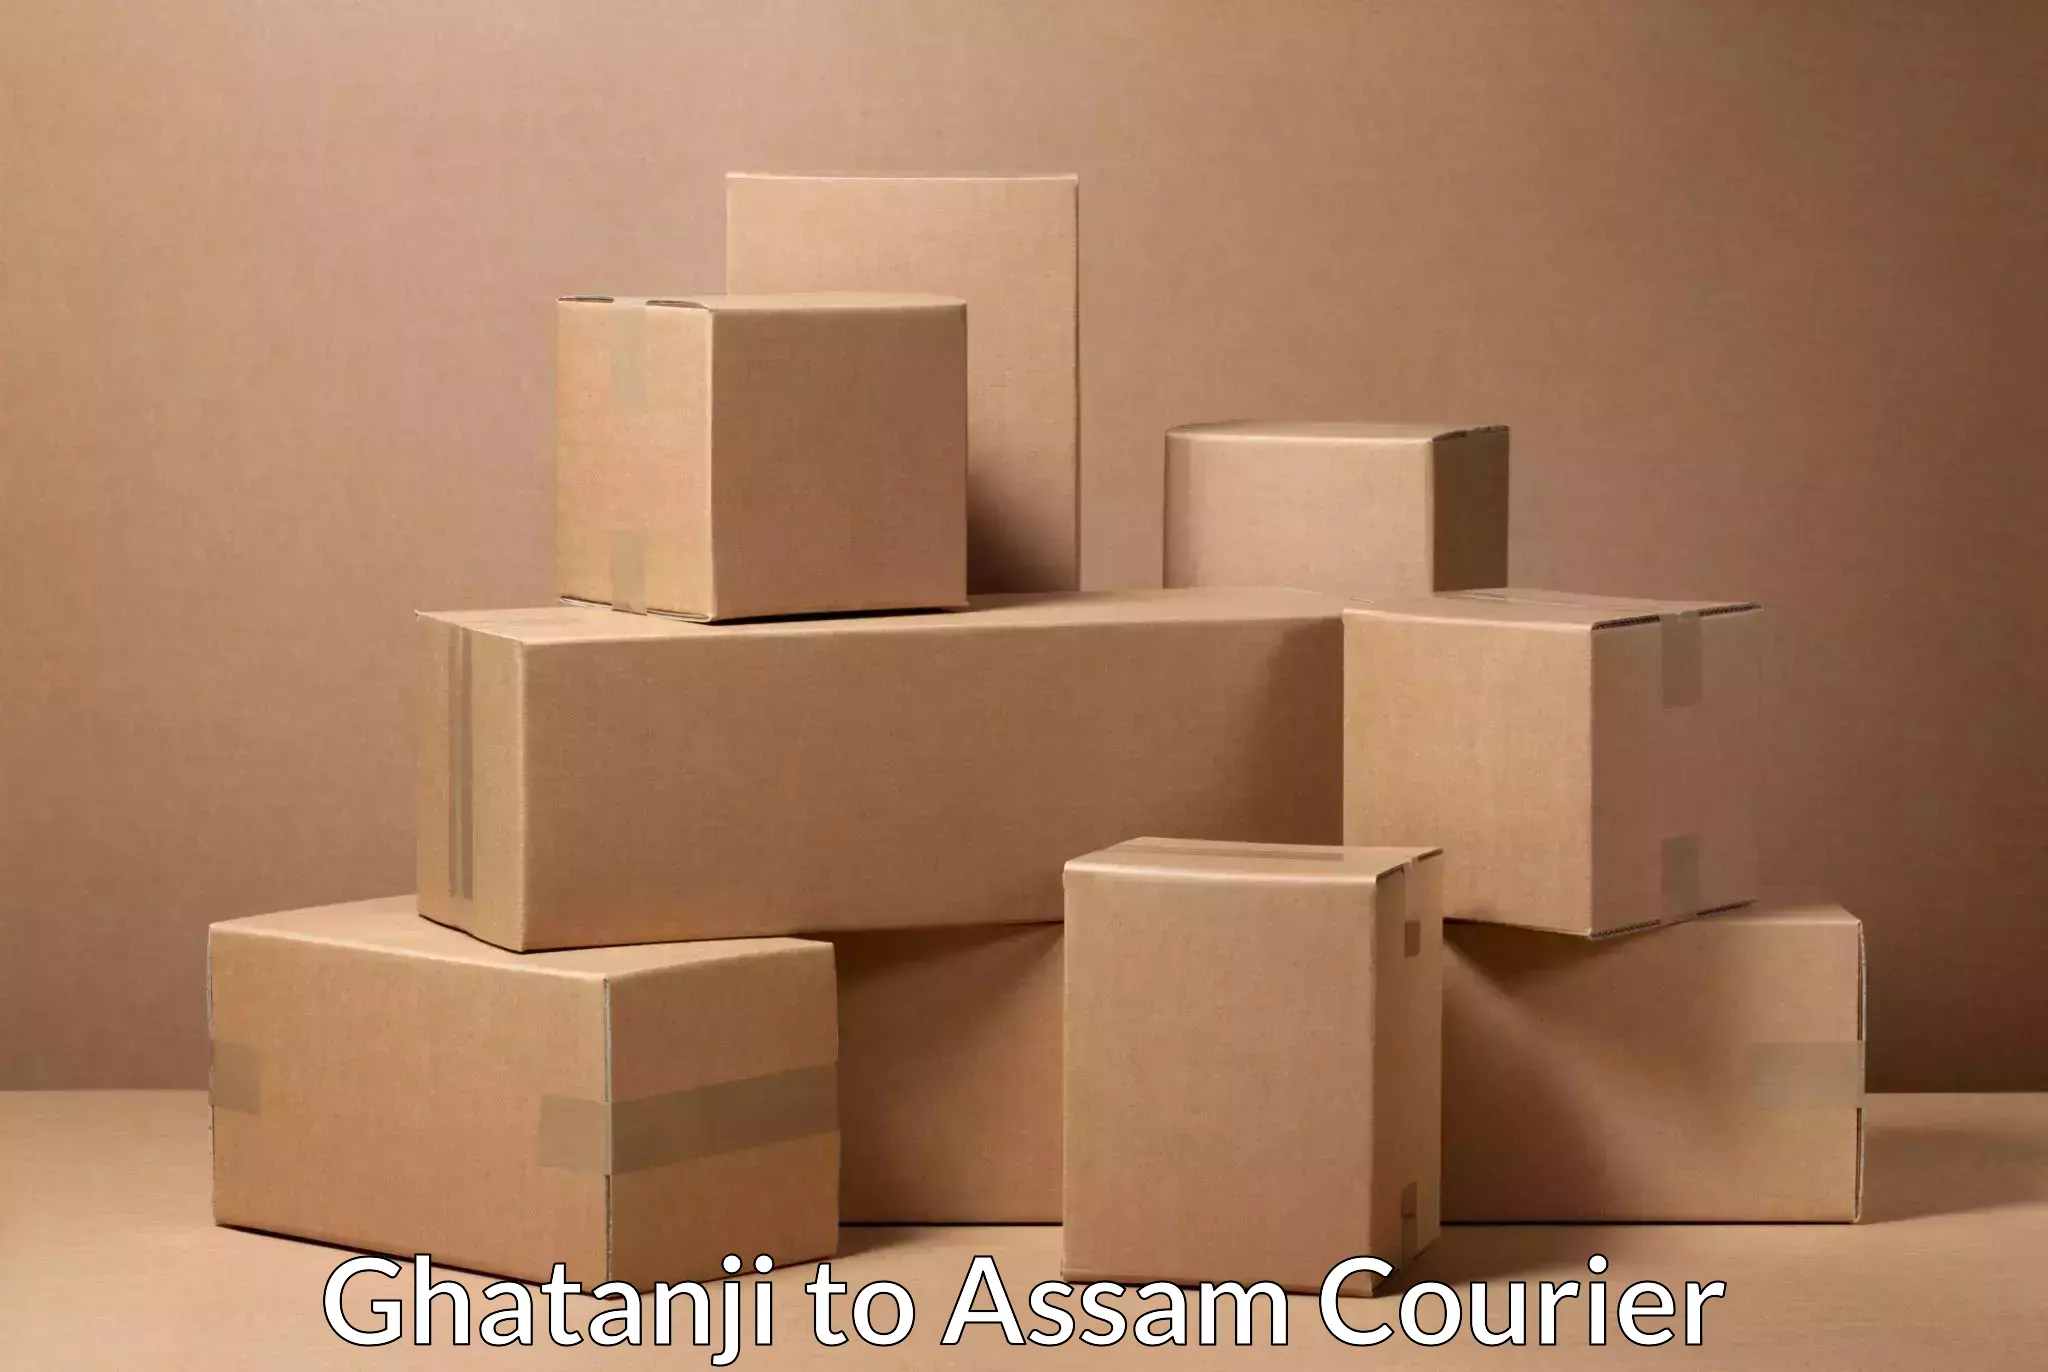 Efficient cargo services Ghatanji to Rupai Siding